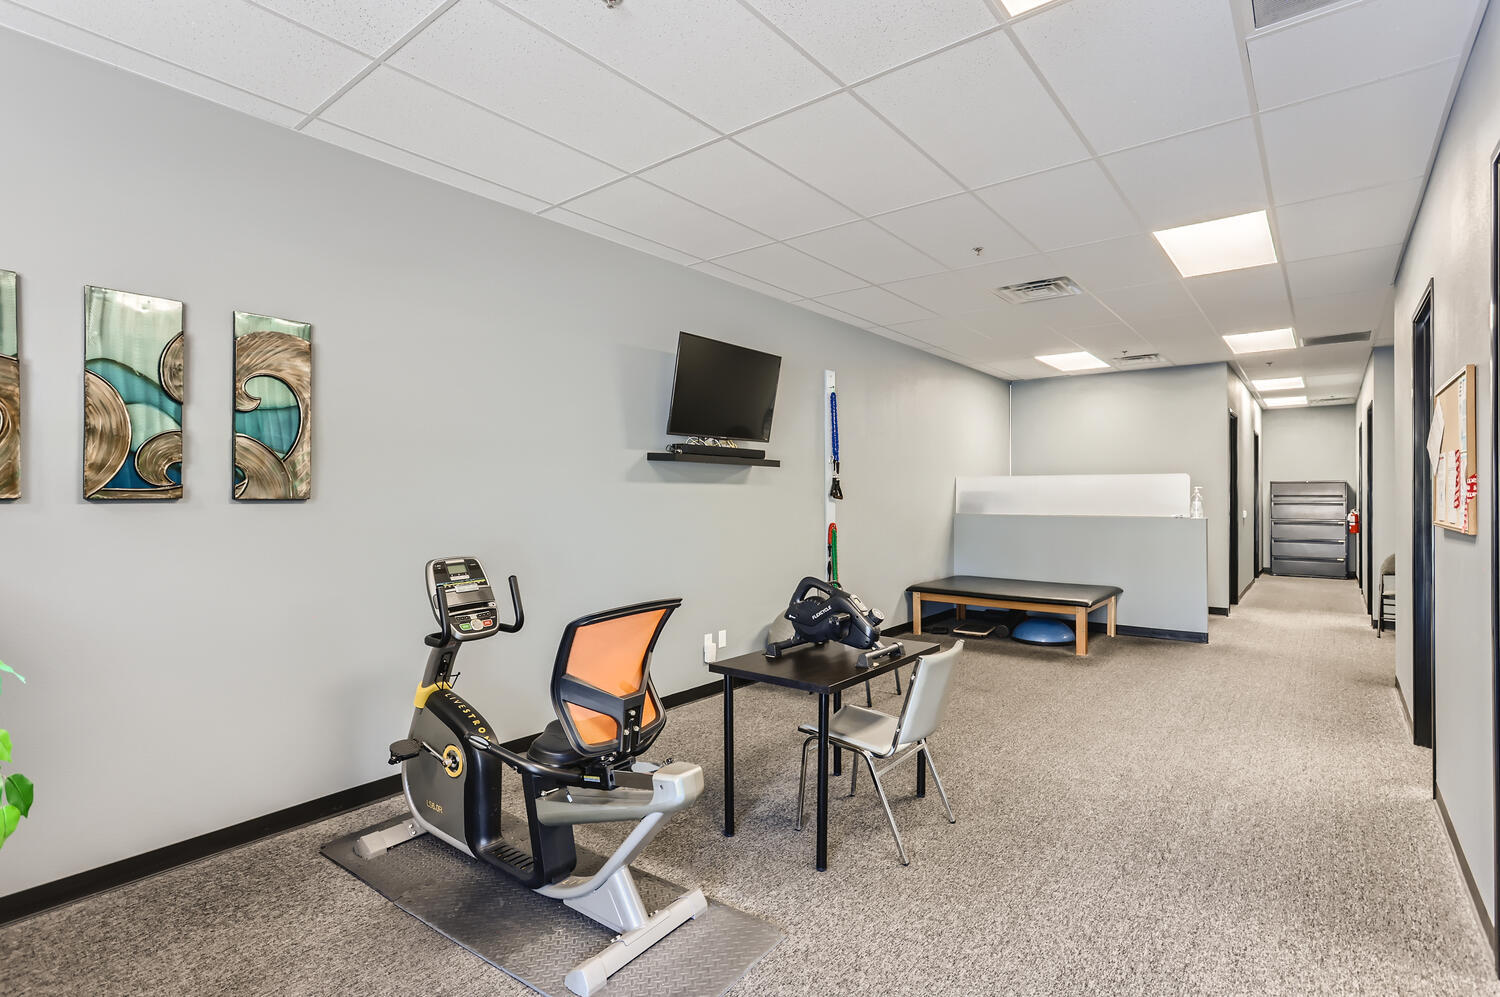 From headaches and back pain to ankle sprains to car accidents, the Blue Diamond Clinic will integrate chiropractic, massage, therapeutic stretches and exercises